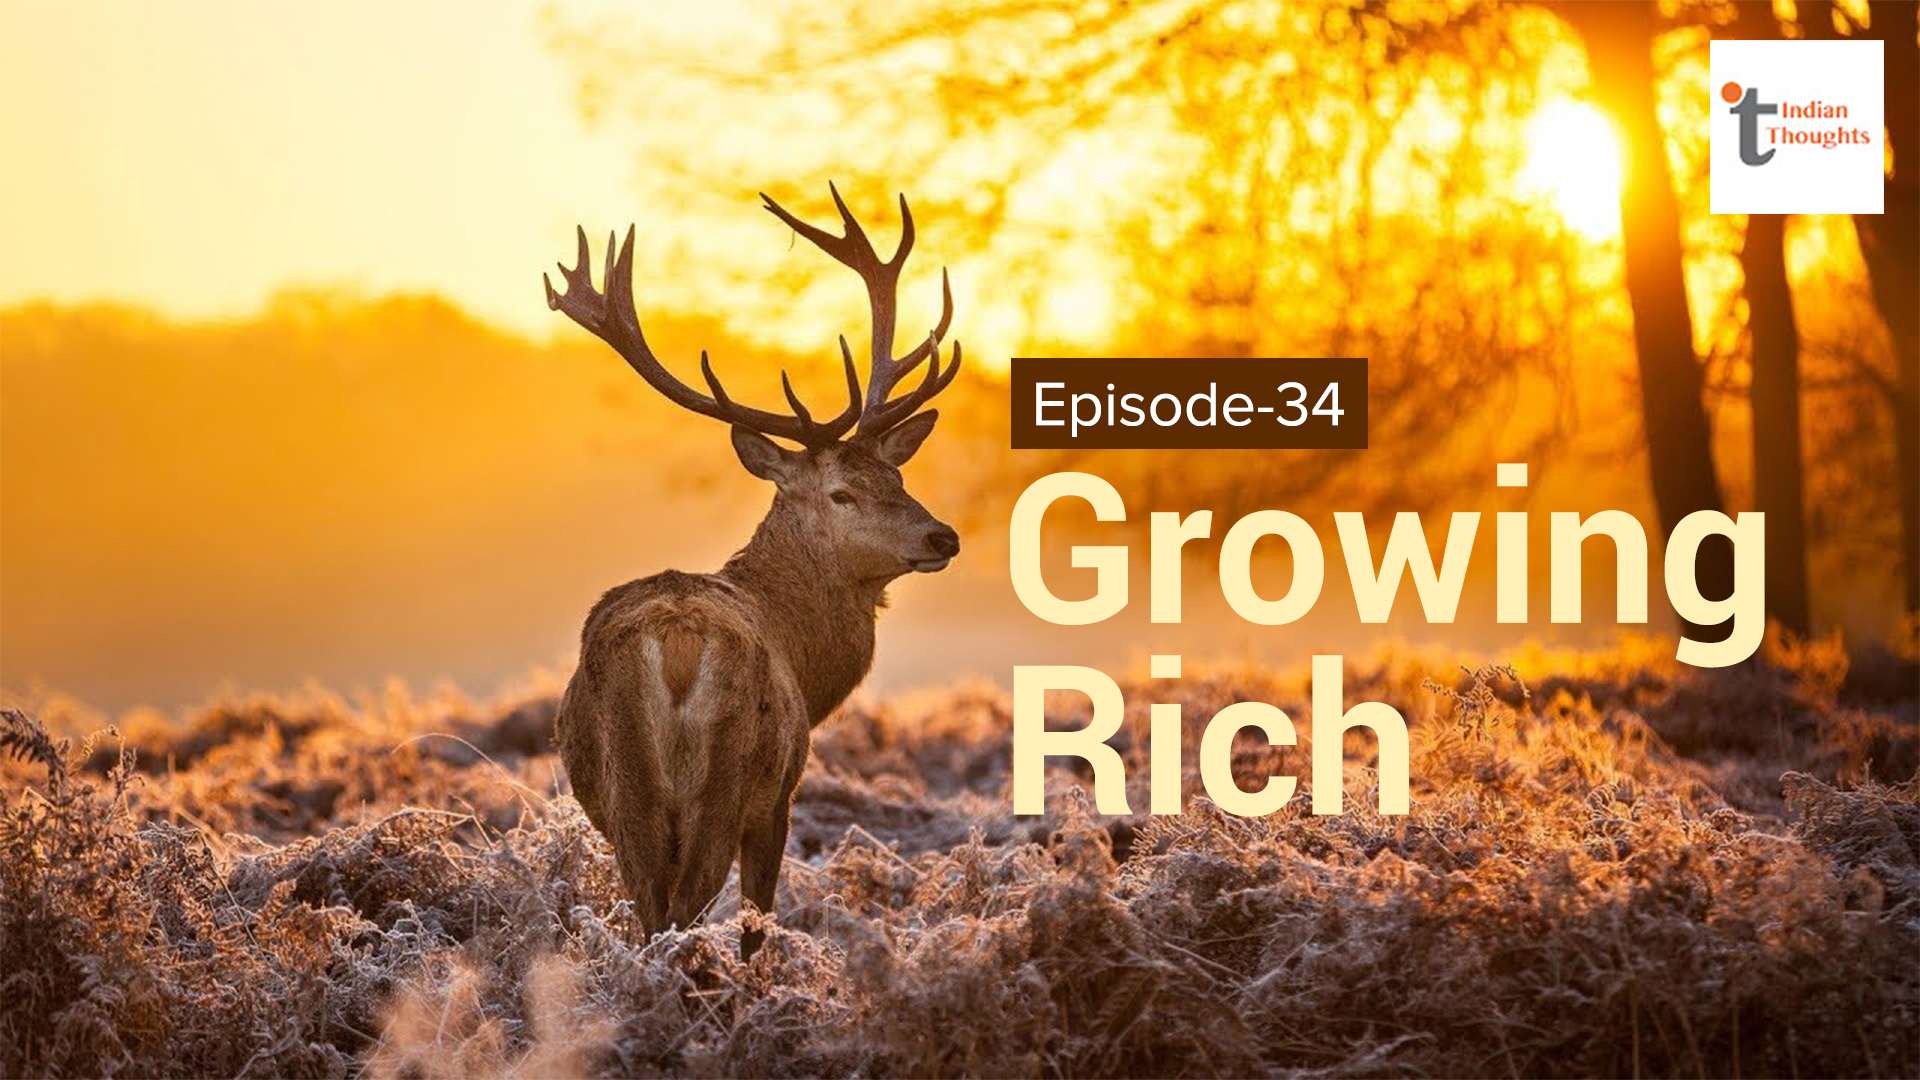 Growing rich